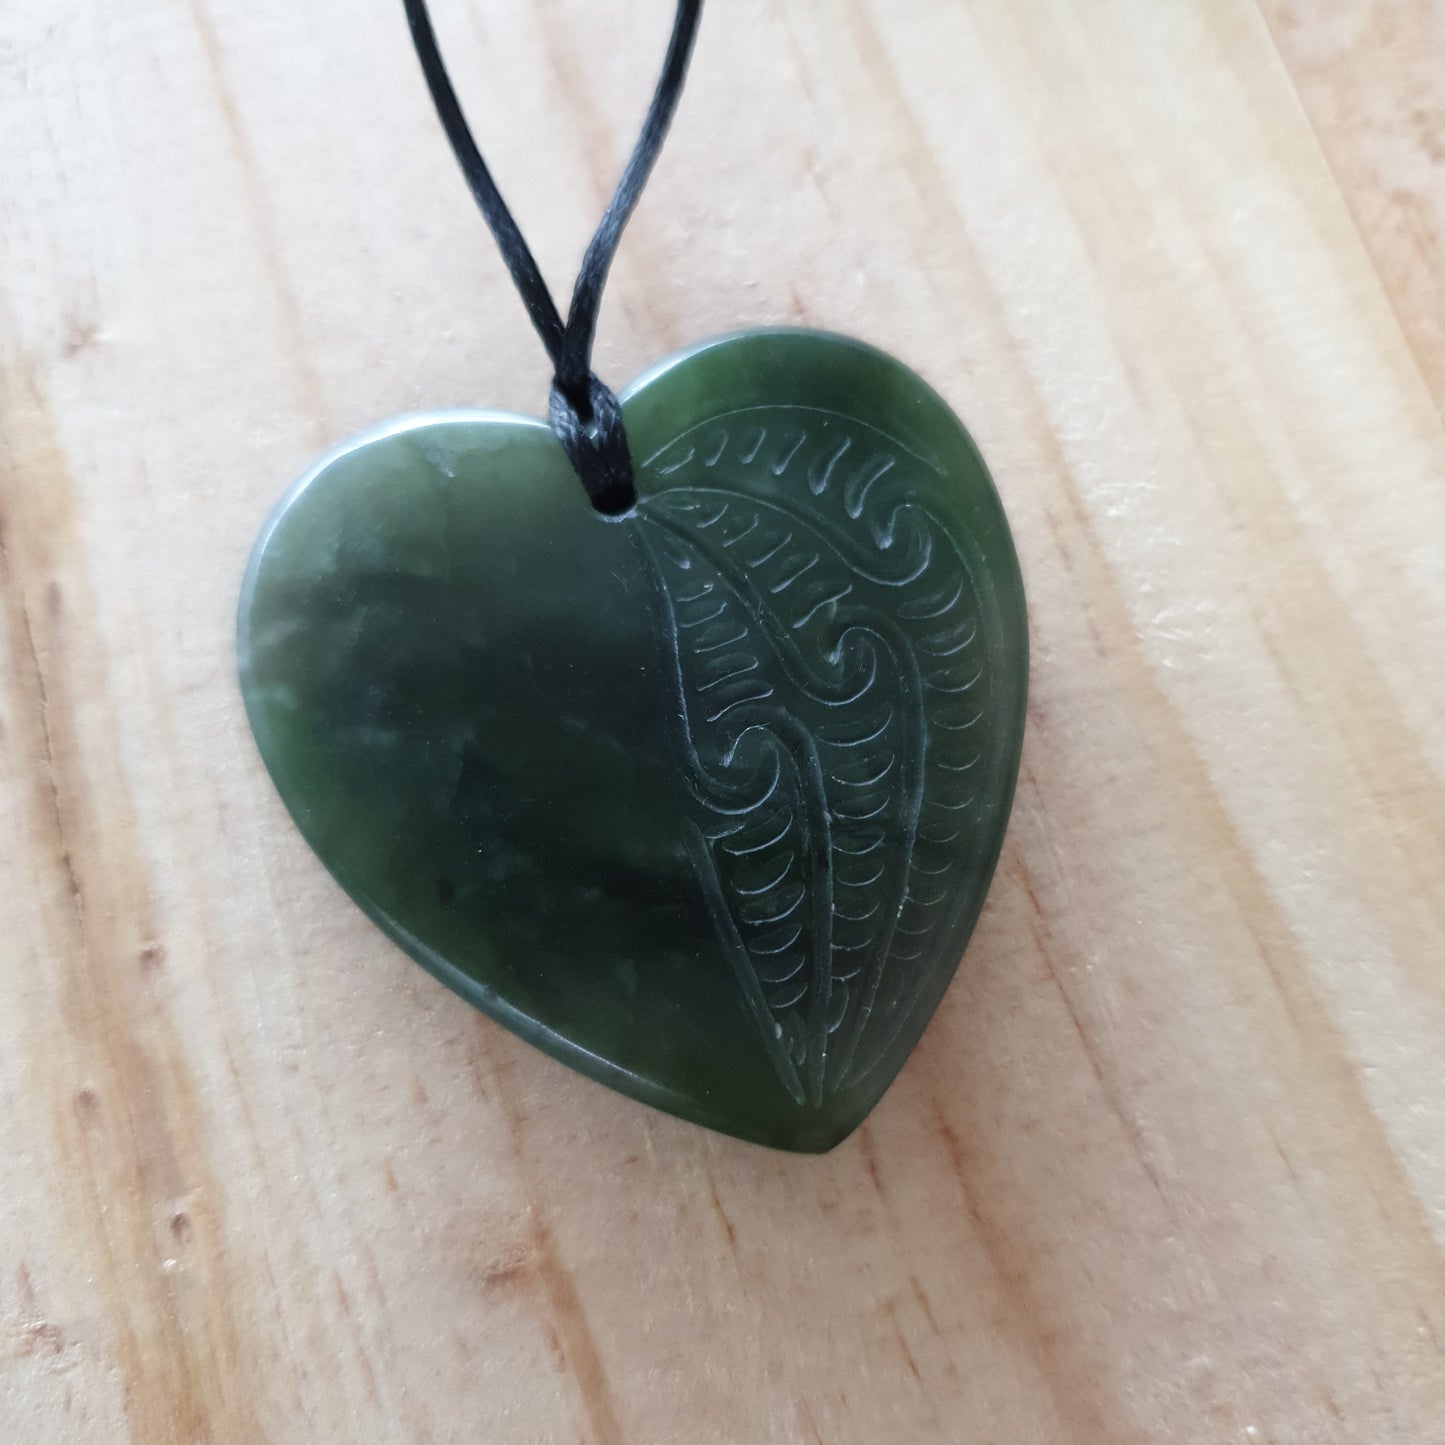 Greenstone Pendant with Carved Detail - Large - Rivendell Shop